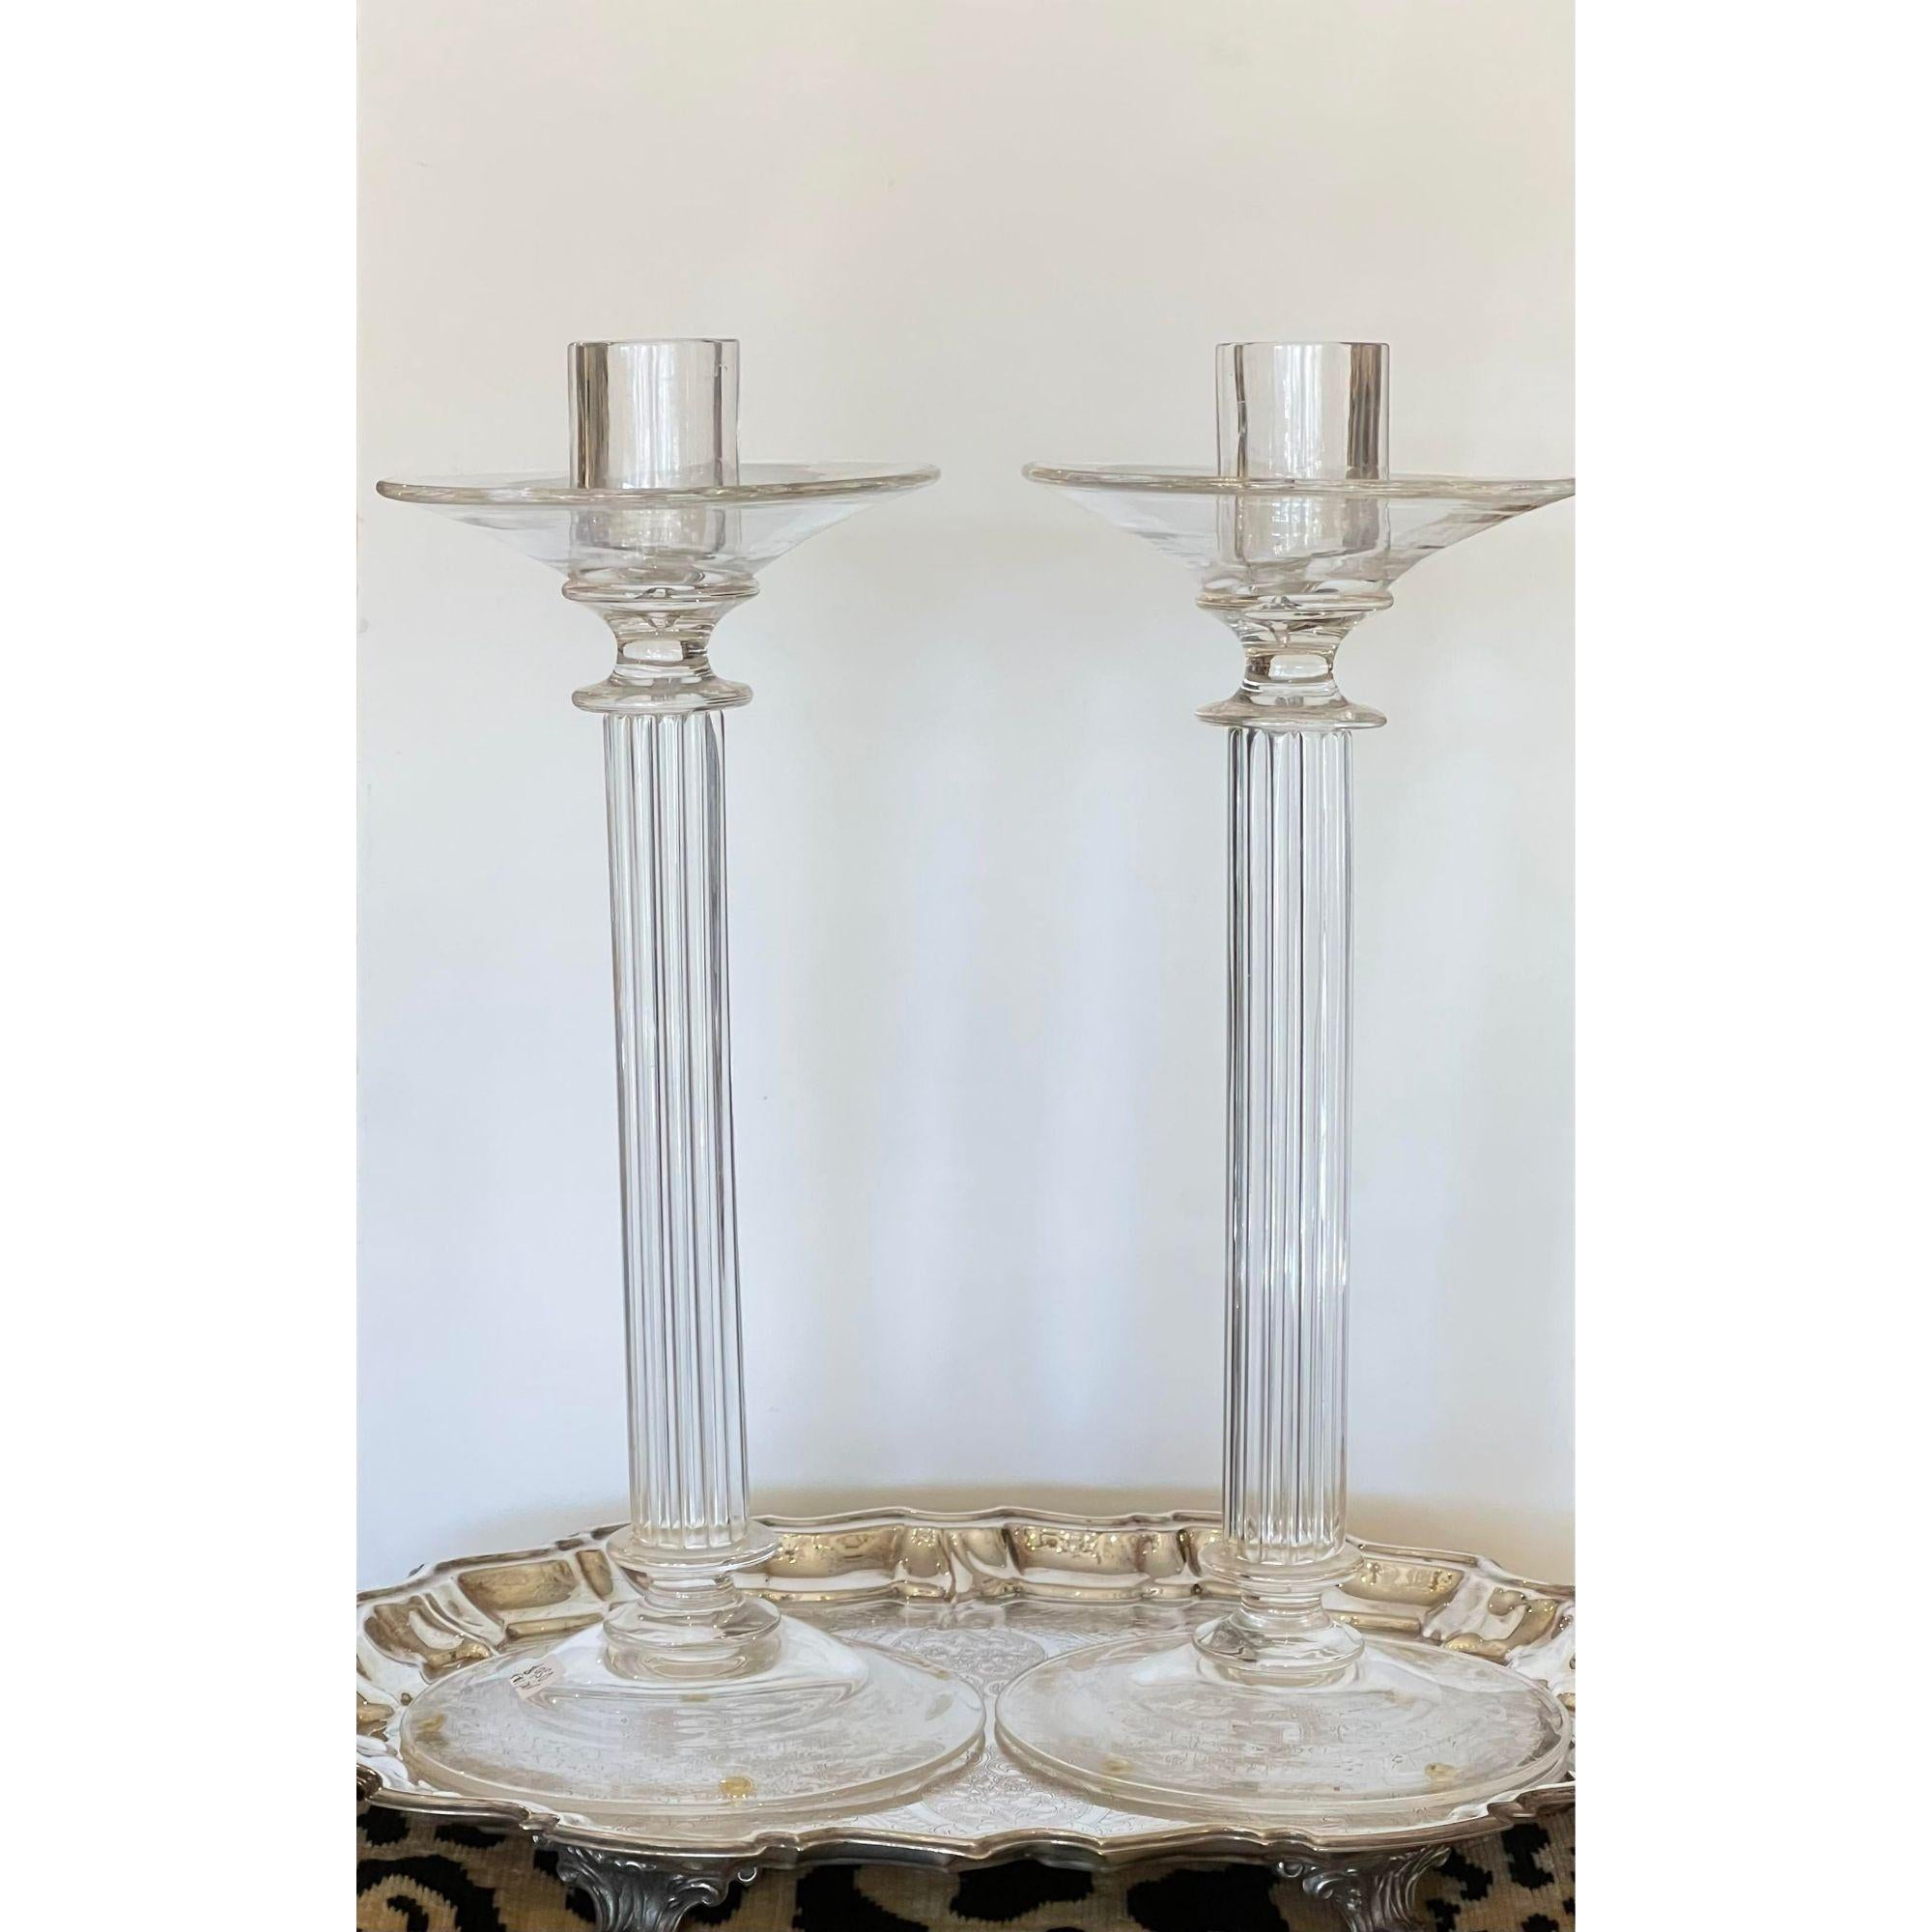 Pair of modern archimede Seguso murano glass crystal candlesticks. Each with a simple fluted neoclassical form. Each signed Archimede segura, murano.

Additional information: 
Materials: crystal, murano glass
Color: transparent
Brand: